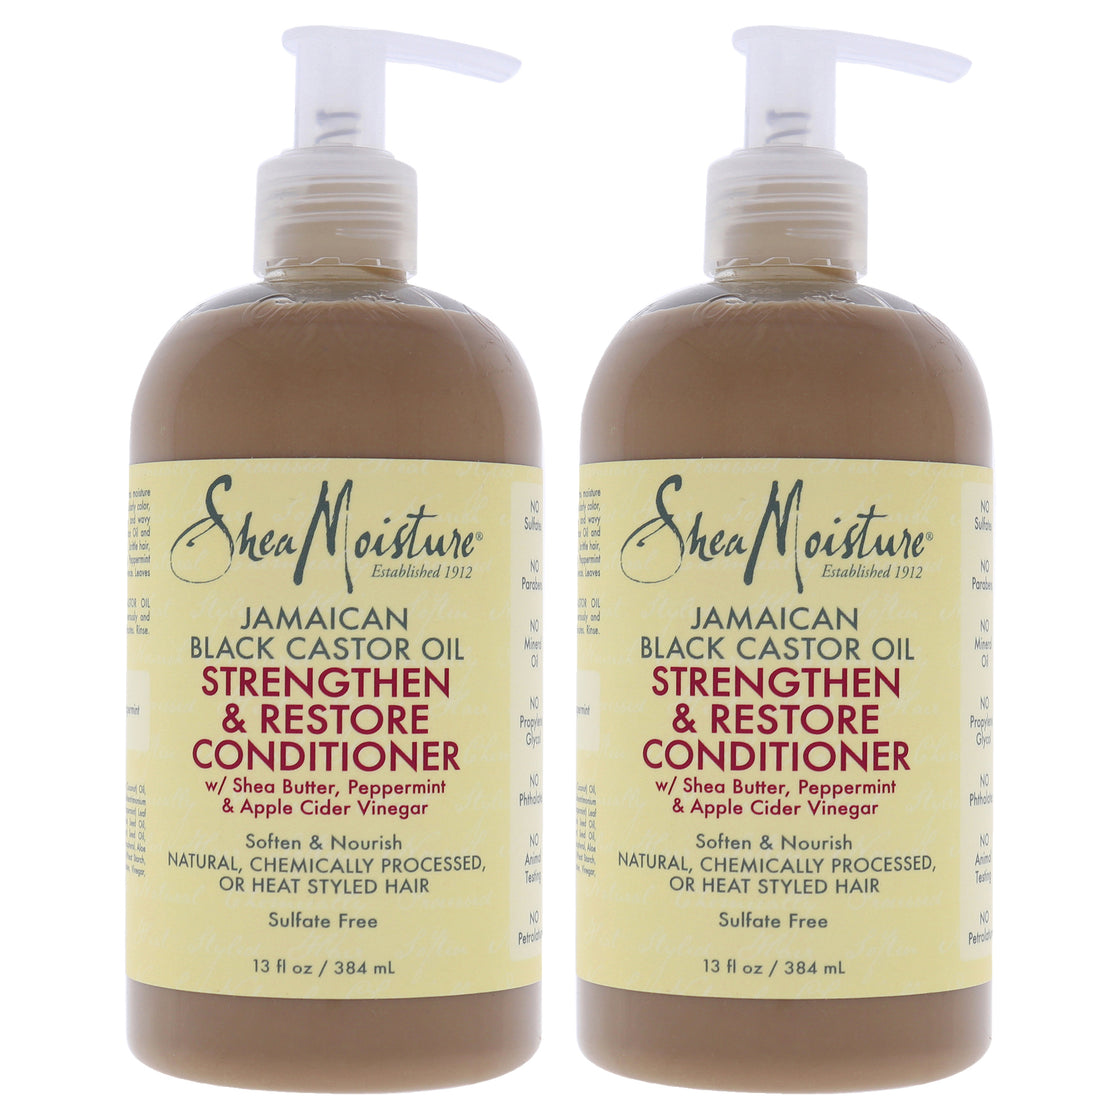 Jamaican Black Castor Oil Grow and Restore Rinse Out Conditioner - Pack of 2 by Shea Moisture for Unisex - 13 oz Conditioner